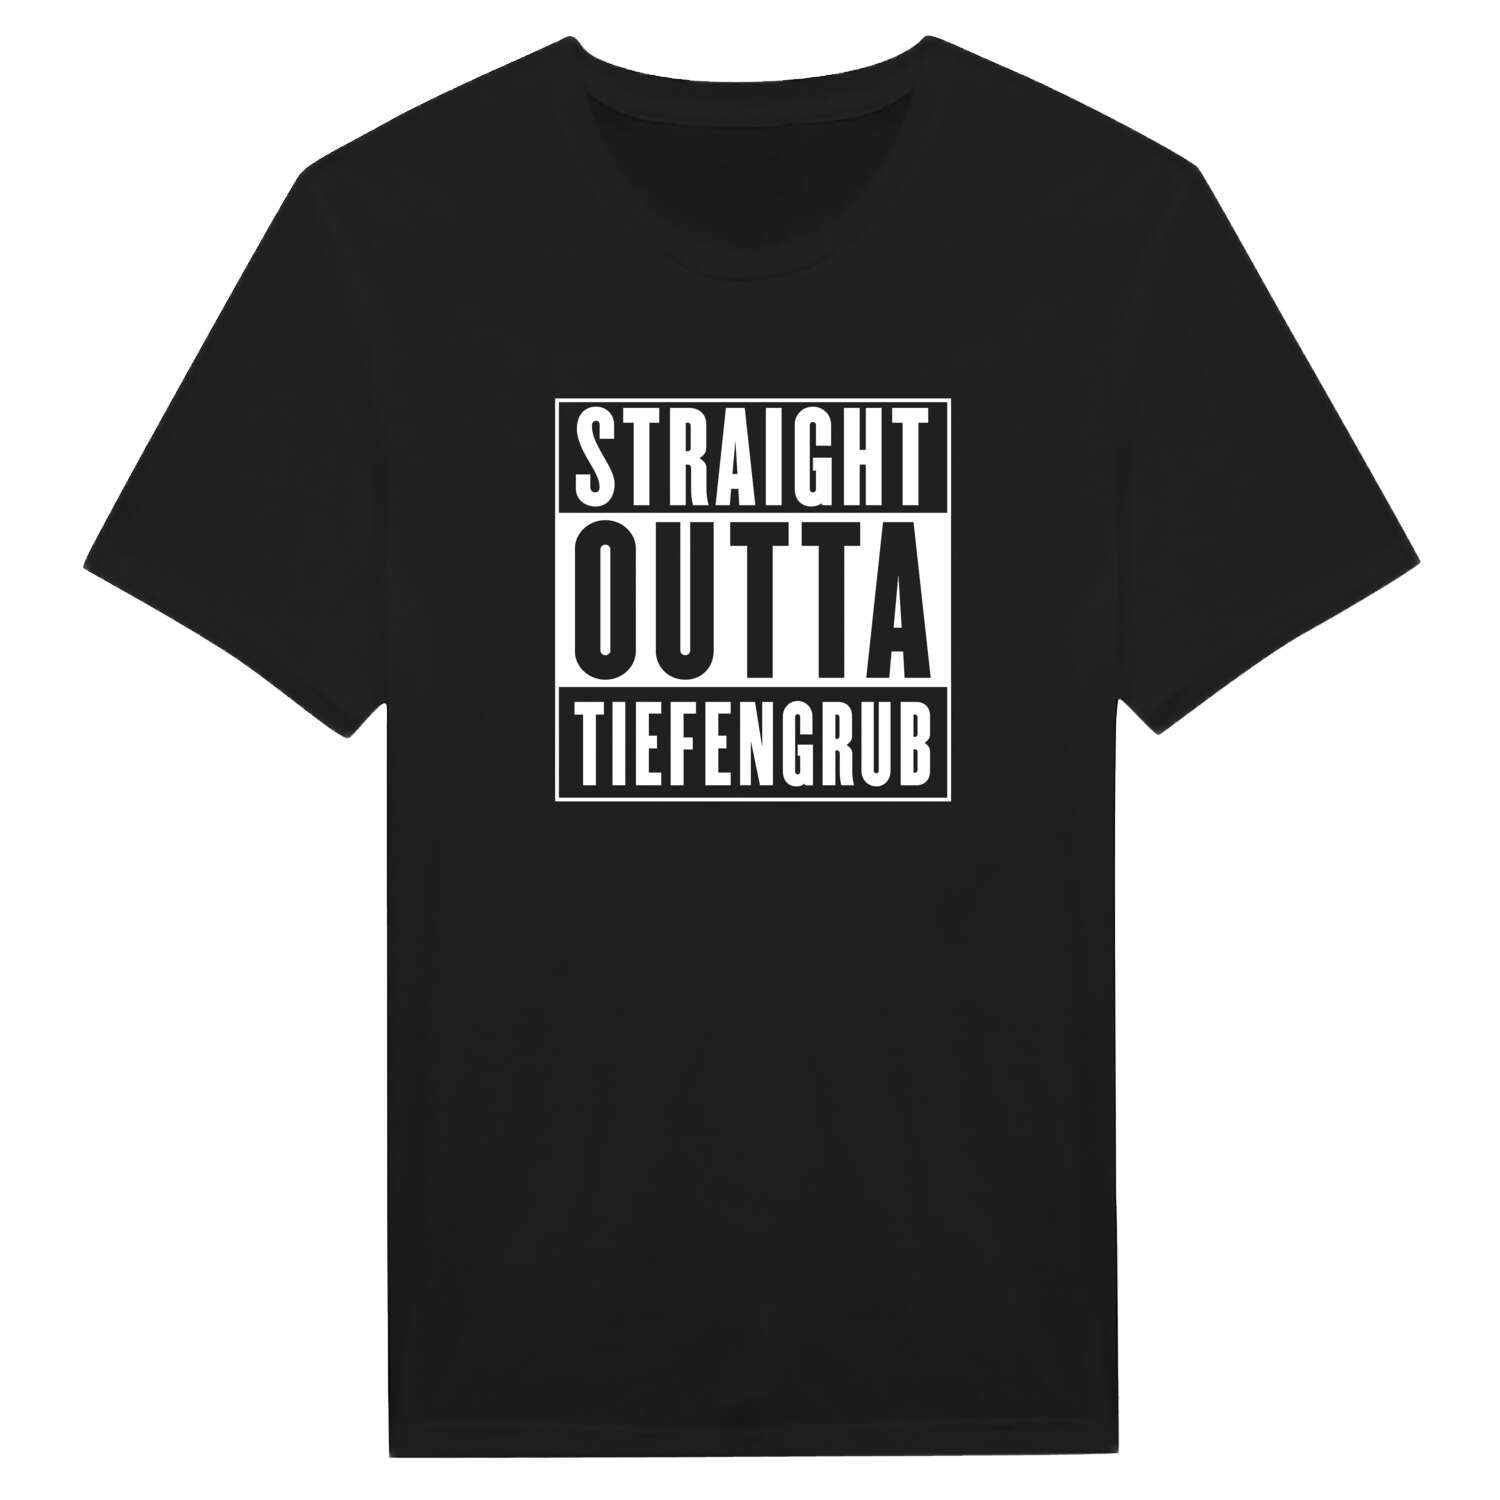 Tiefengrub T-Shirt »Straight Outta«